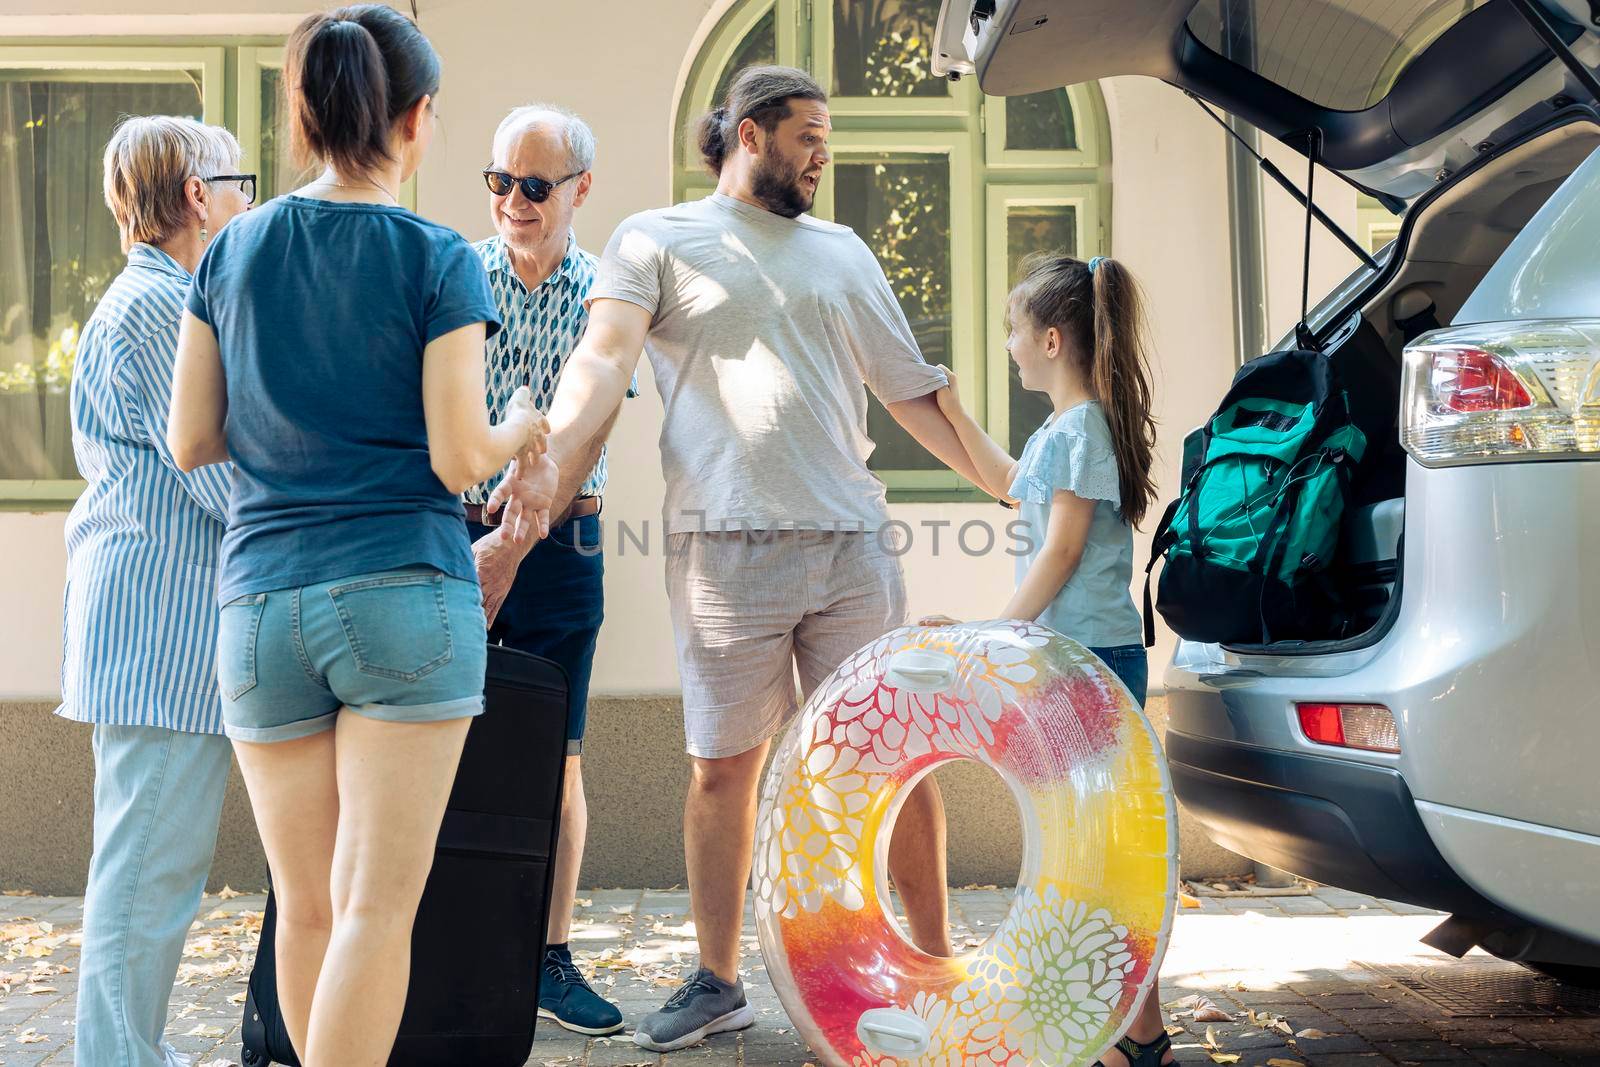 Caucasian people leaving on summer holiday, putting travel bags and inflatable in automobile trunk. European family travelling together on vacation journey, loading luggage and suitcase.